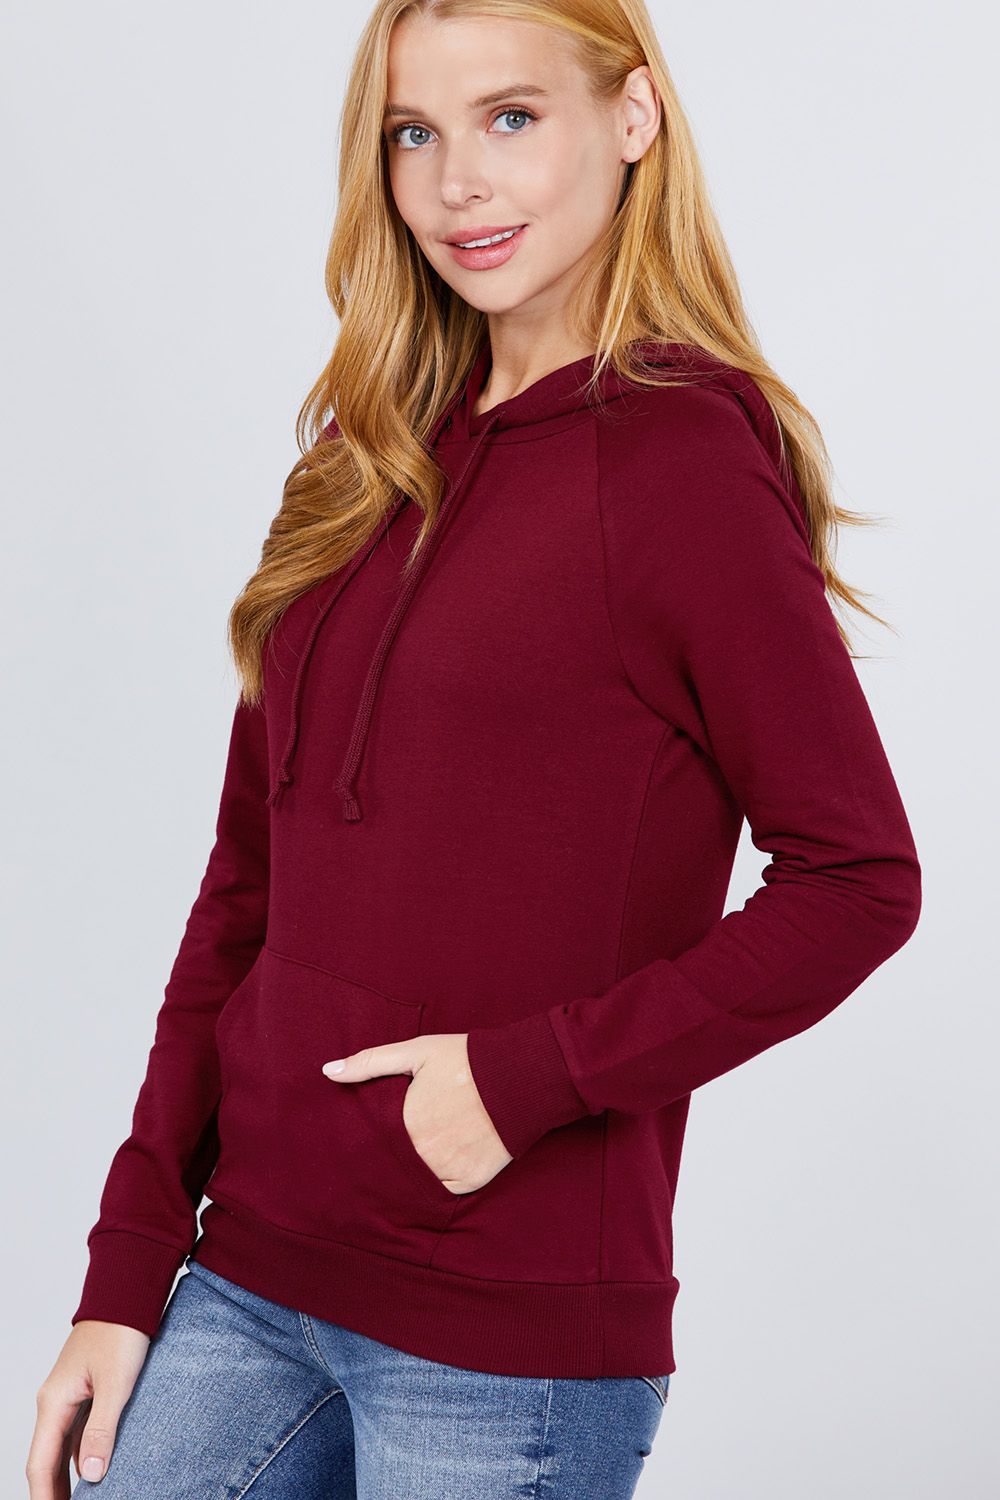 French Terry Pullover Hoodie French Terry Pullover Hoodie - M&R CORNER M&R CORNER